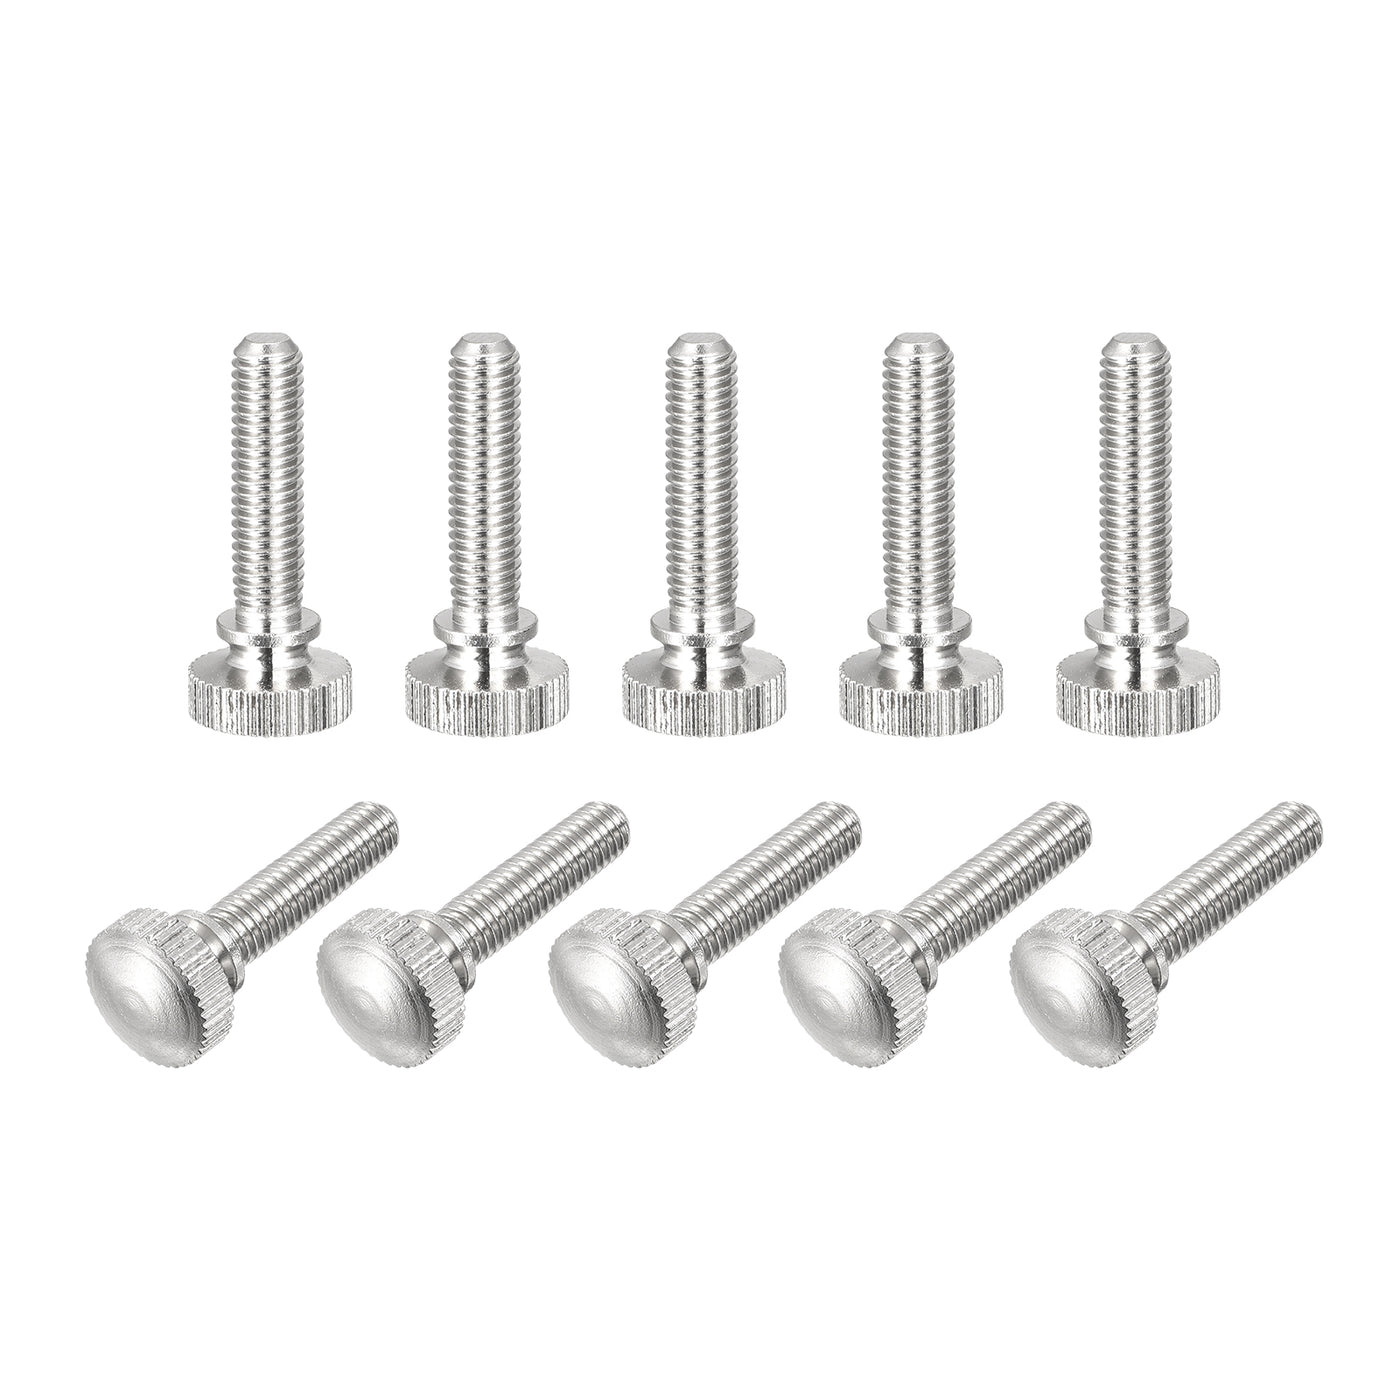 uxcell Uxcell Knurled Thumb Screws, M5x20mm Brass Shoulder Bolts Grip Knobs Fasteners, Nickel Plated 10Pcs